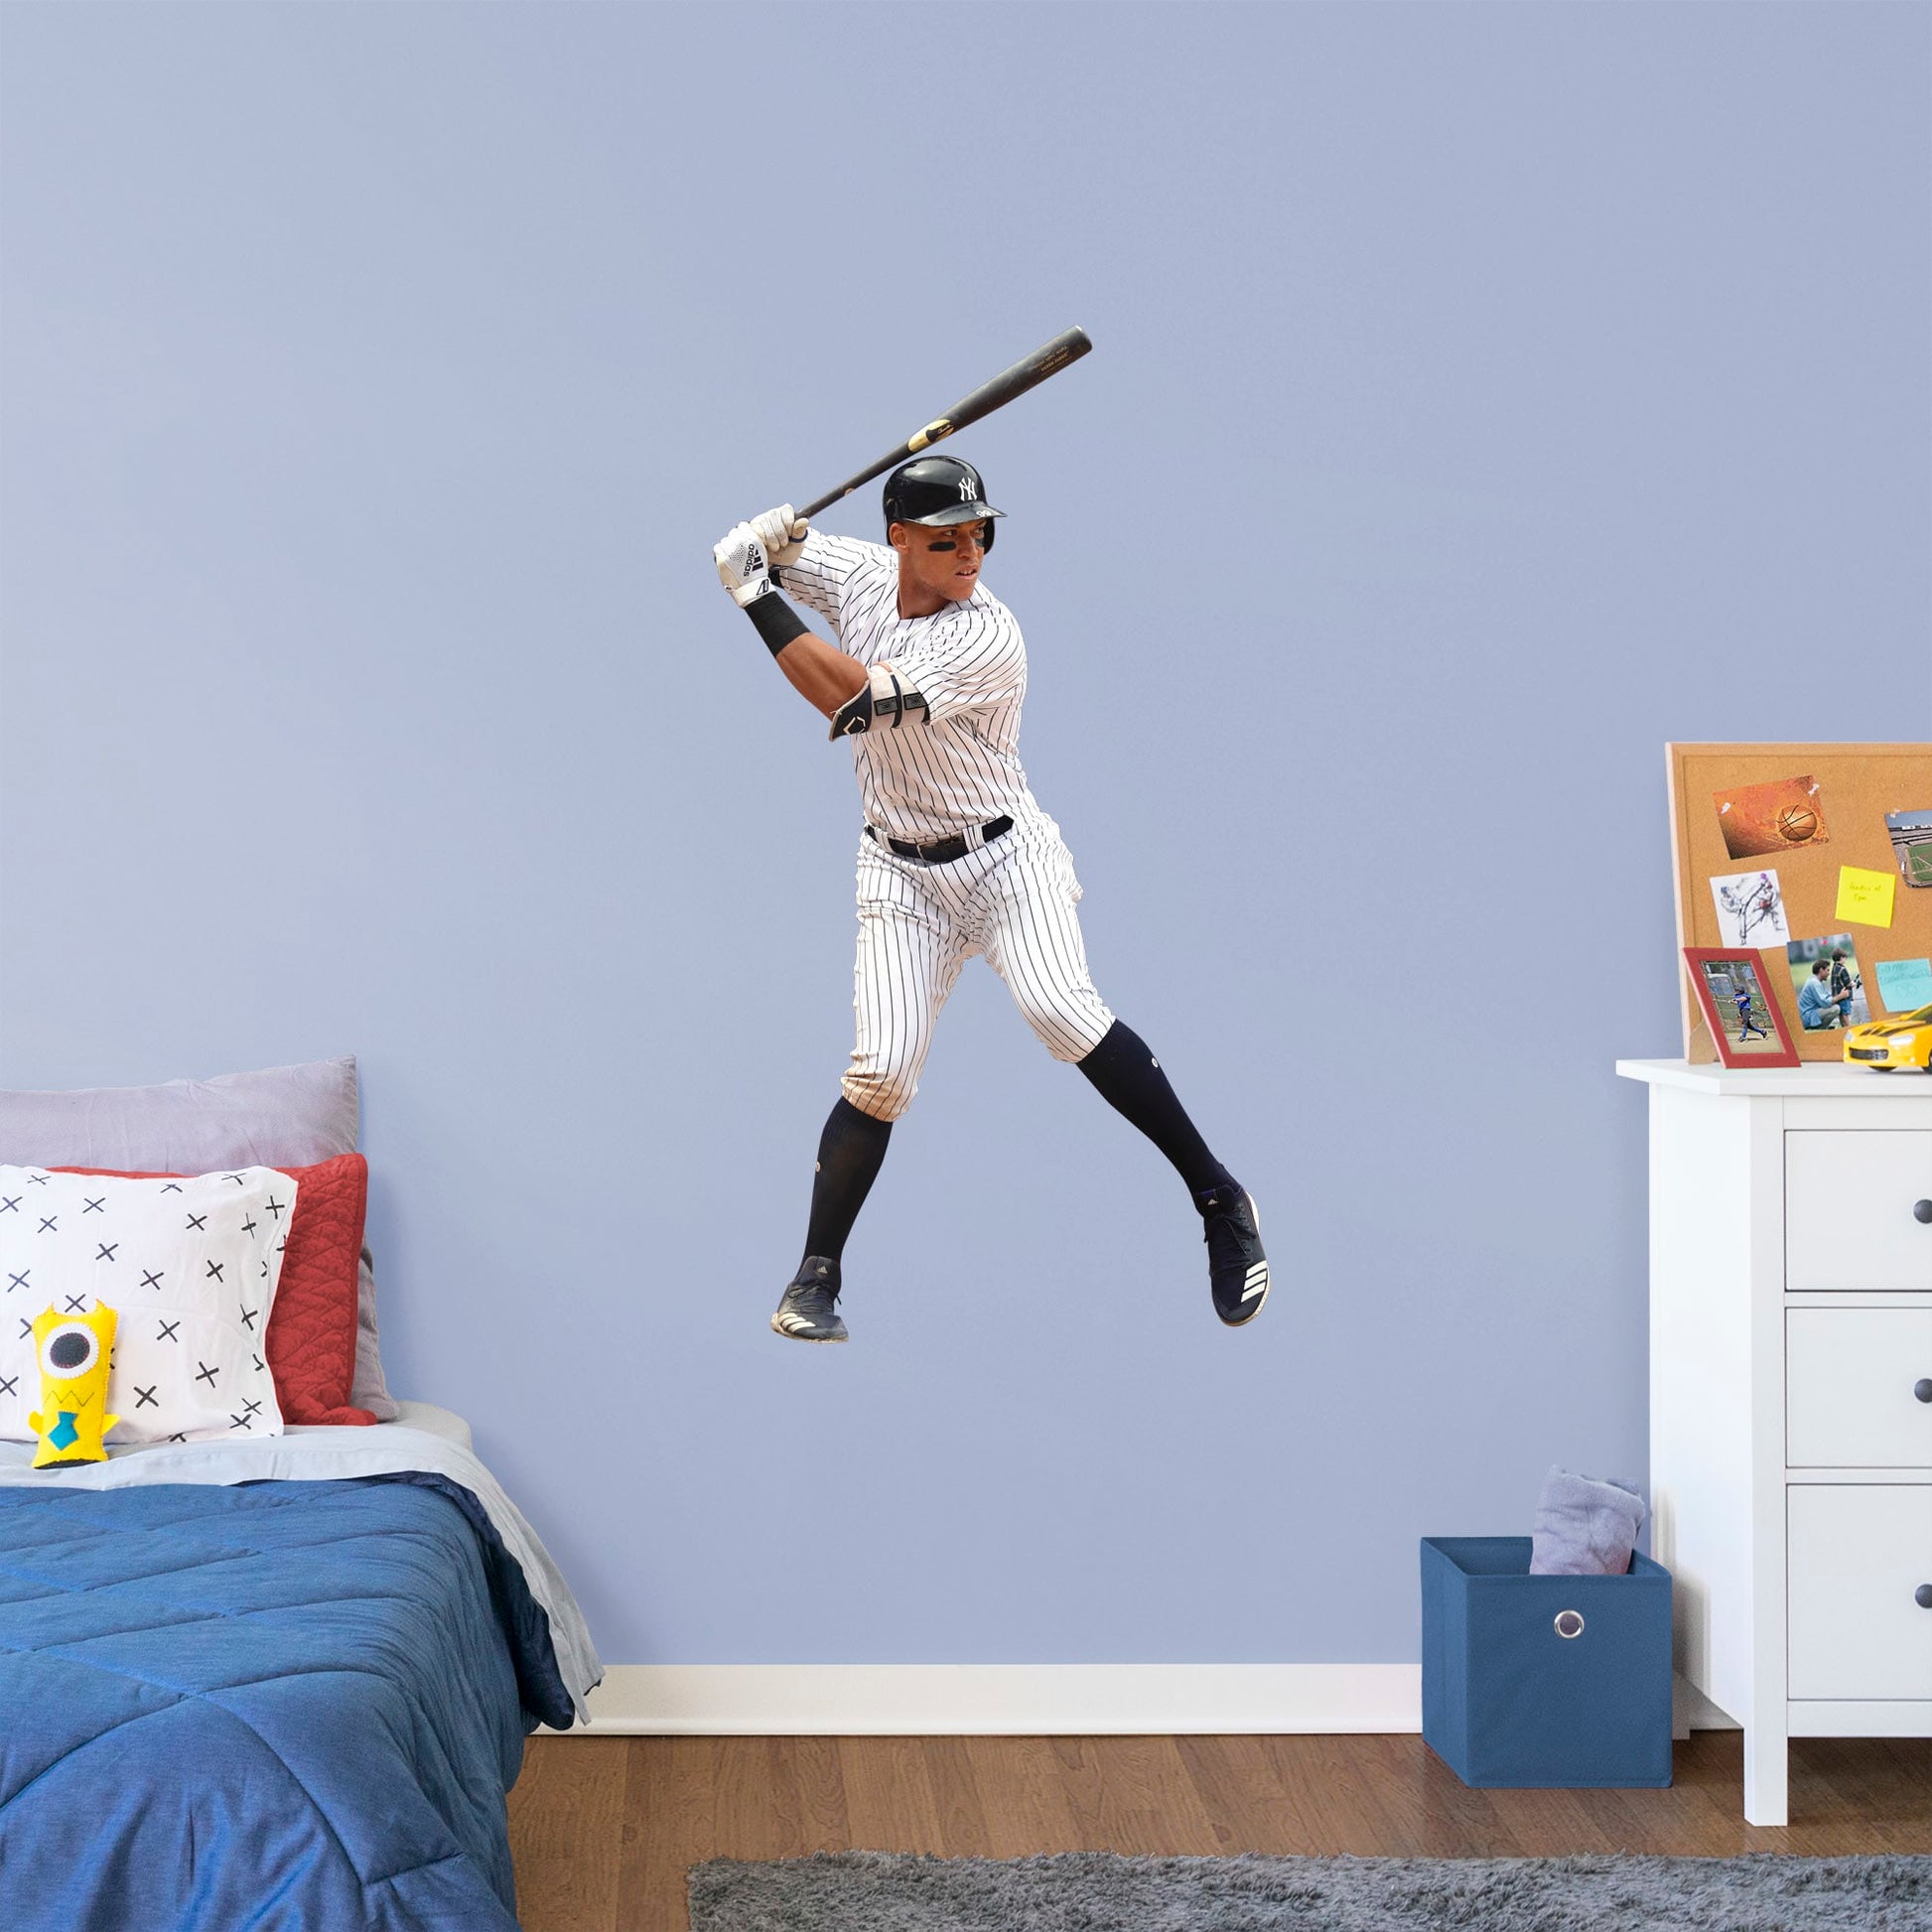 Life-Size Athlete + 2 Decals (49"W x 89"H) Feed your inner sports fanatic with this unique Aaron Judge wall decal. Perfect for unseasoned Yanks or lifelong season-ticket holders, the reusable image of the 2017 Rookie of the Year pick can be moved from room to room with ease. The verdict is in: this adhesive graphic is perfect die-hard fans of The Judge.